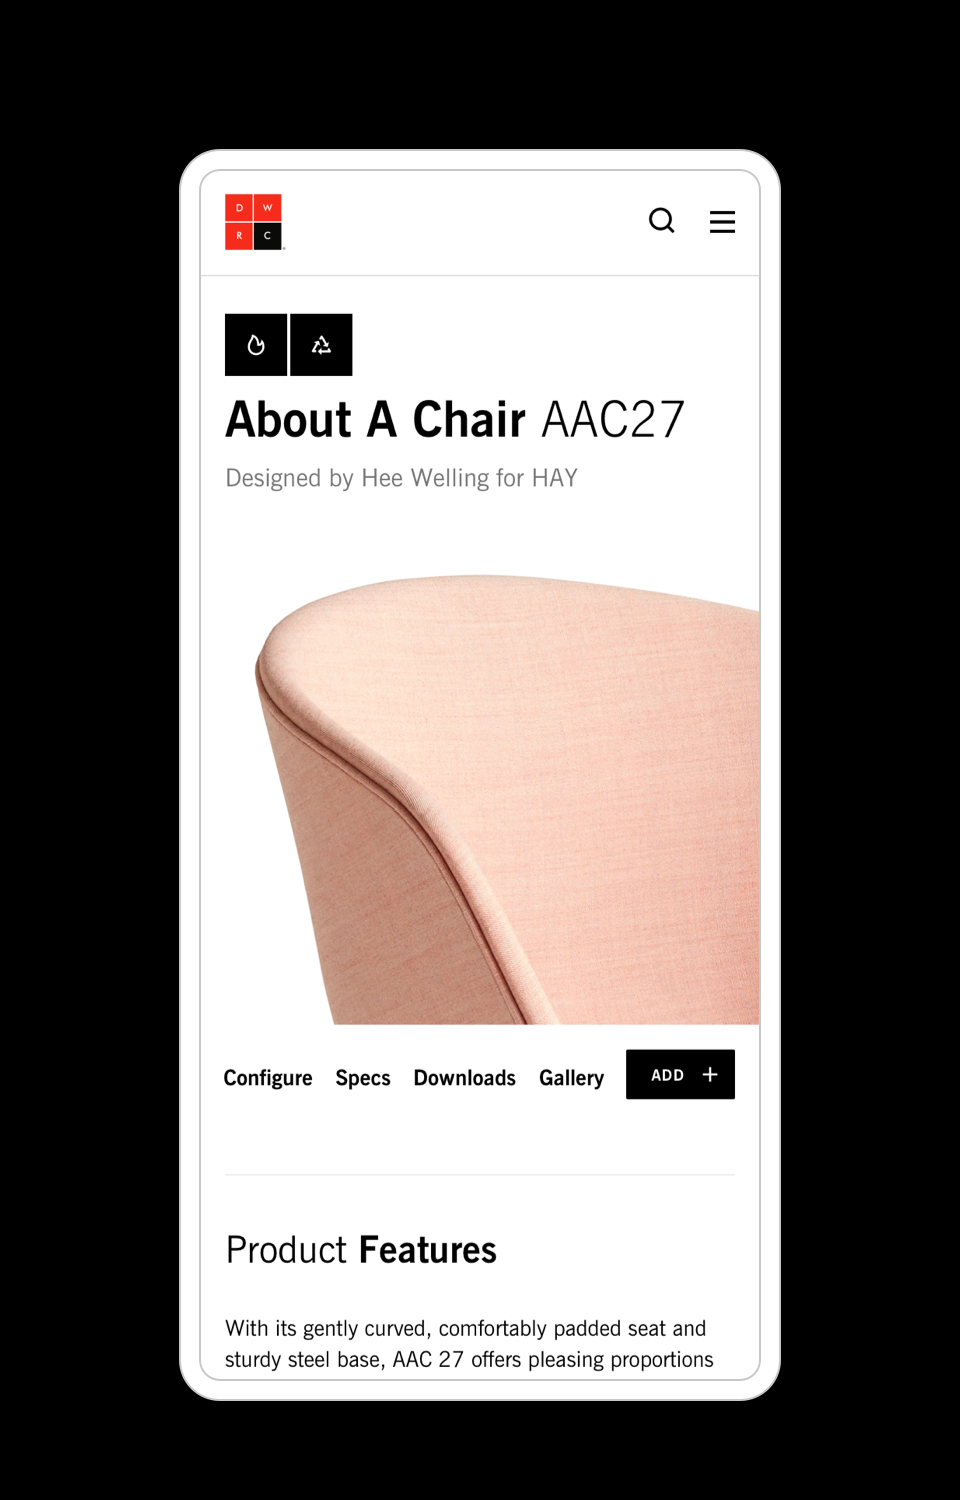 Mobile Product Detail Page featuring AAC27 chair